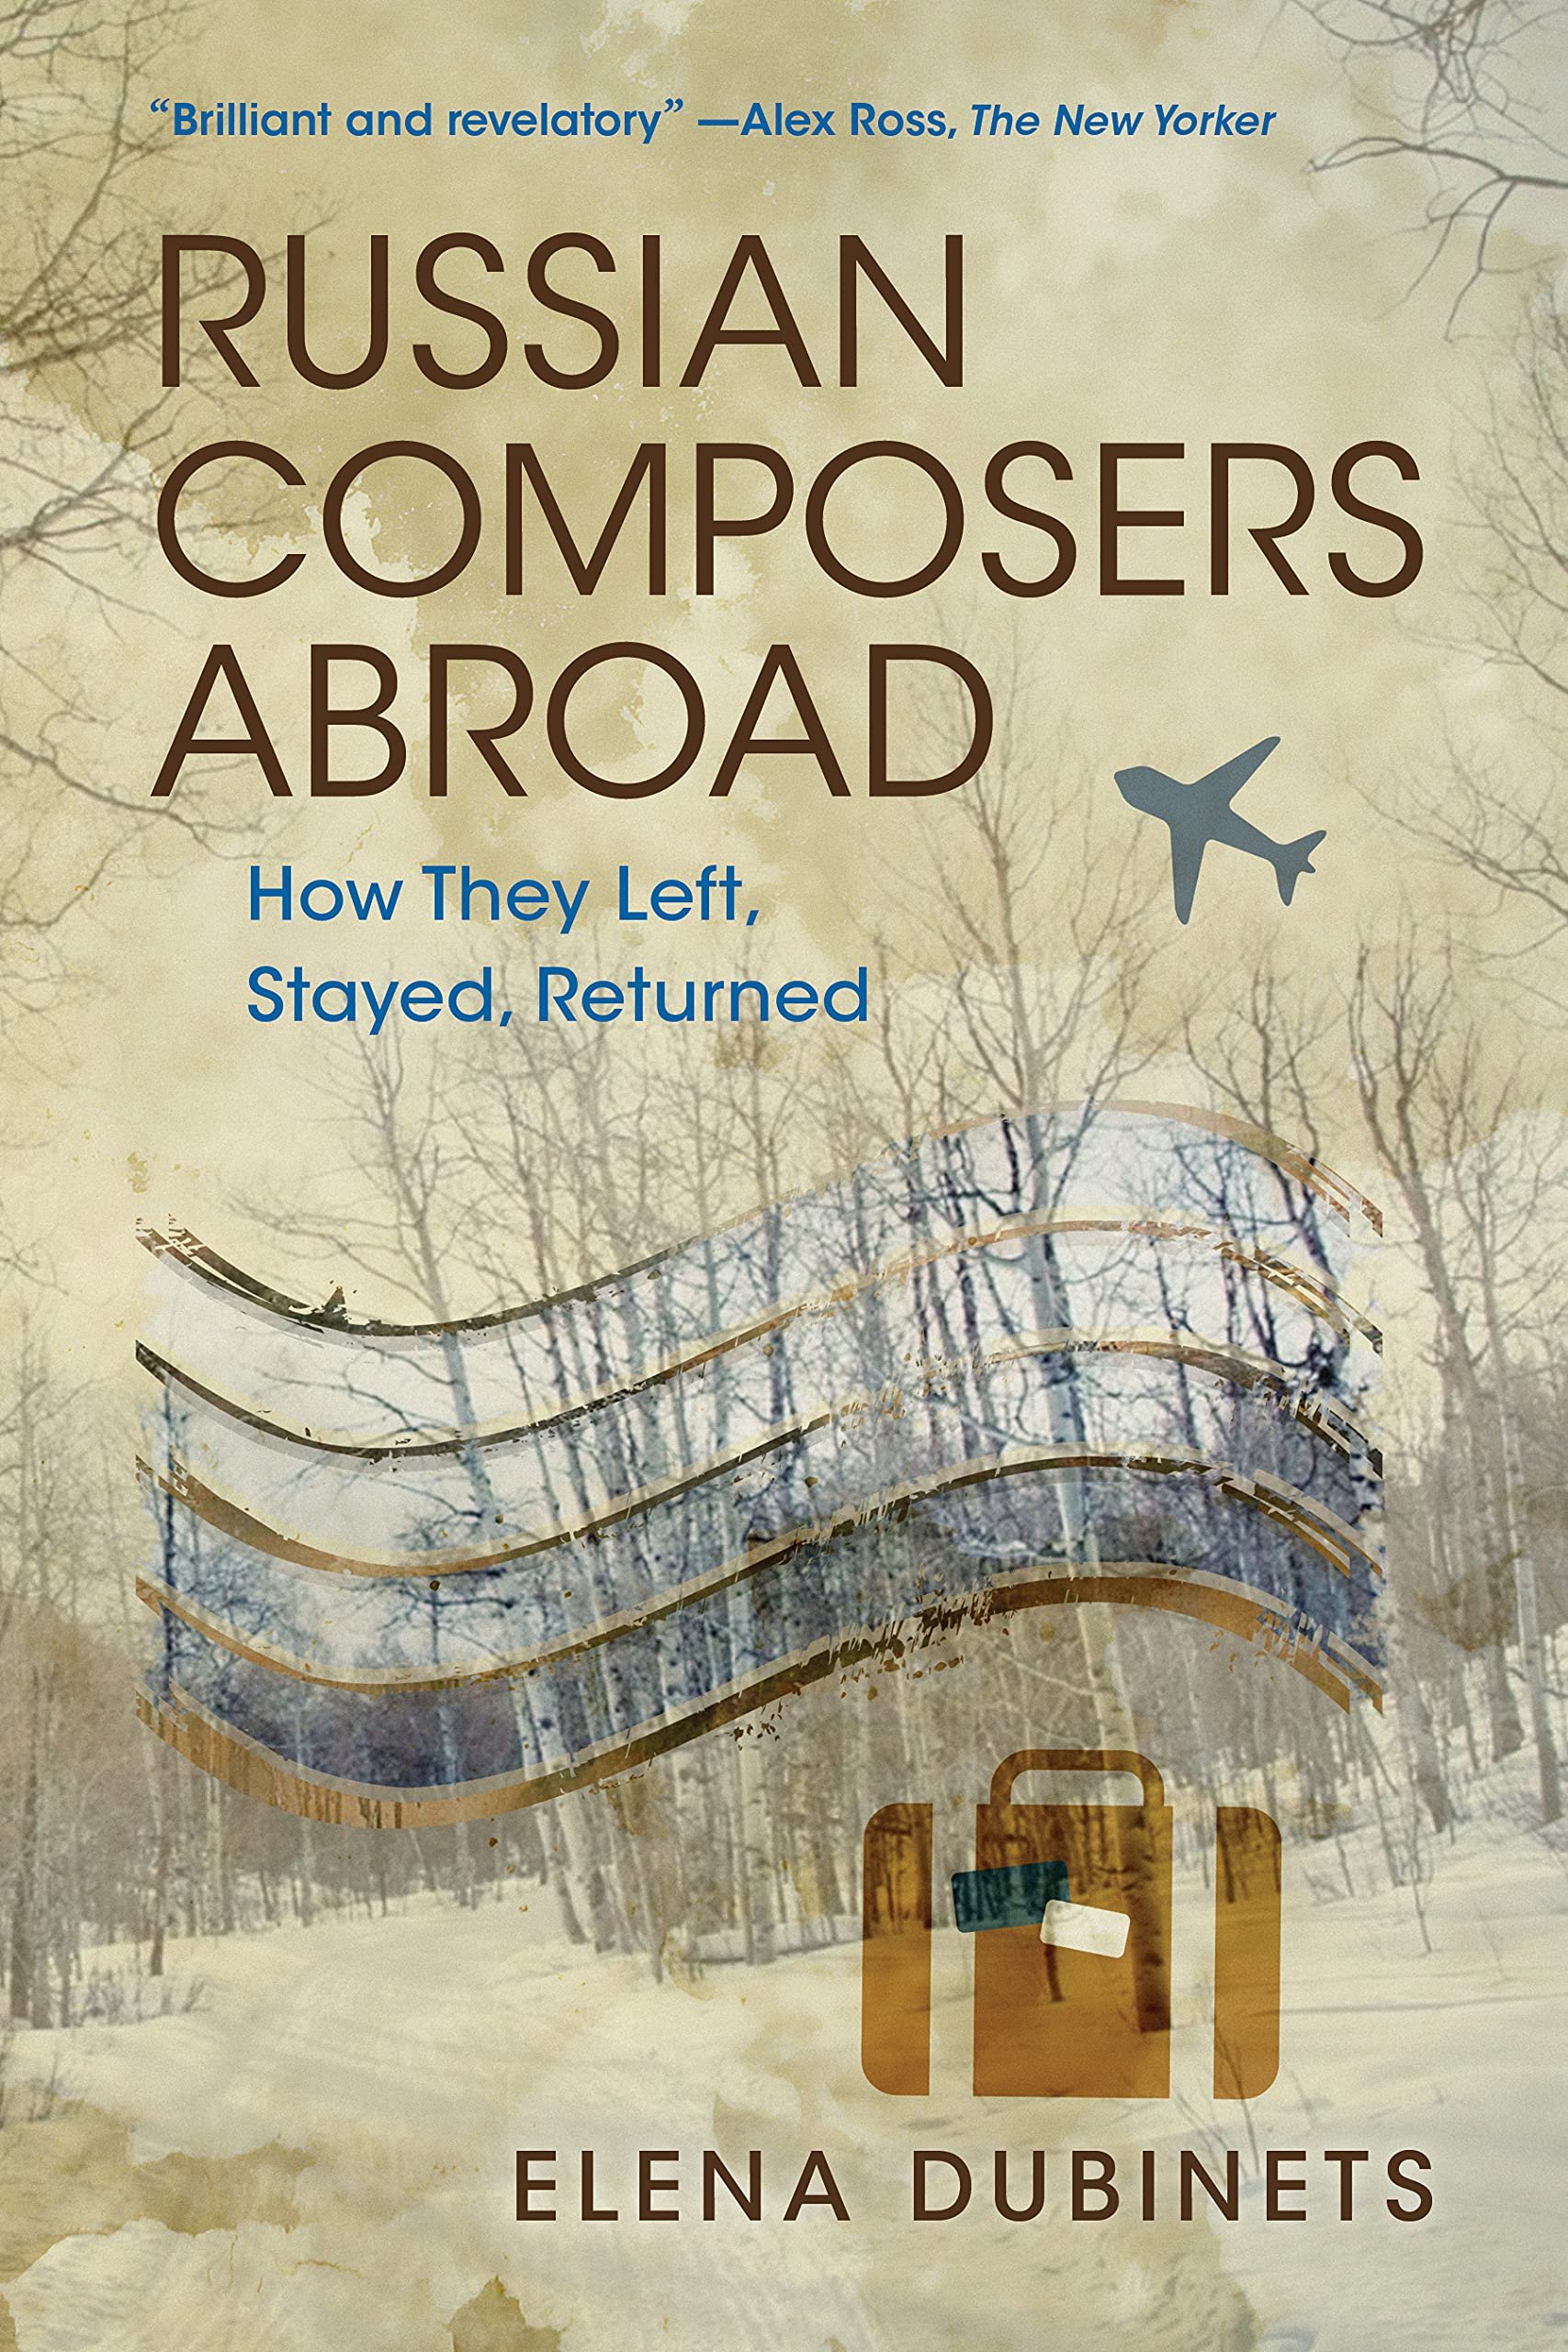 RussianComposersAbroad_cover.jpg